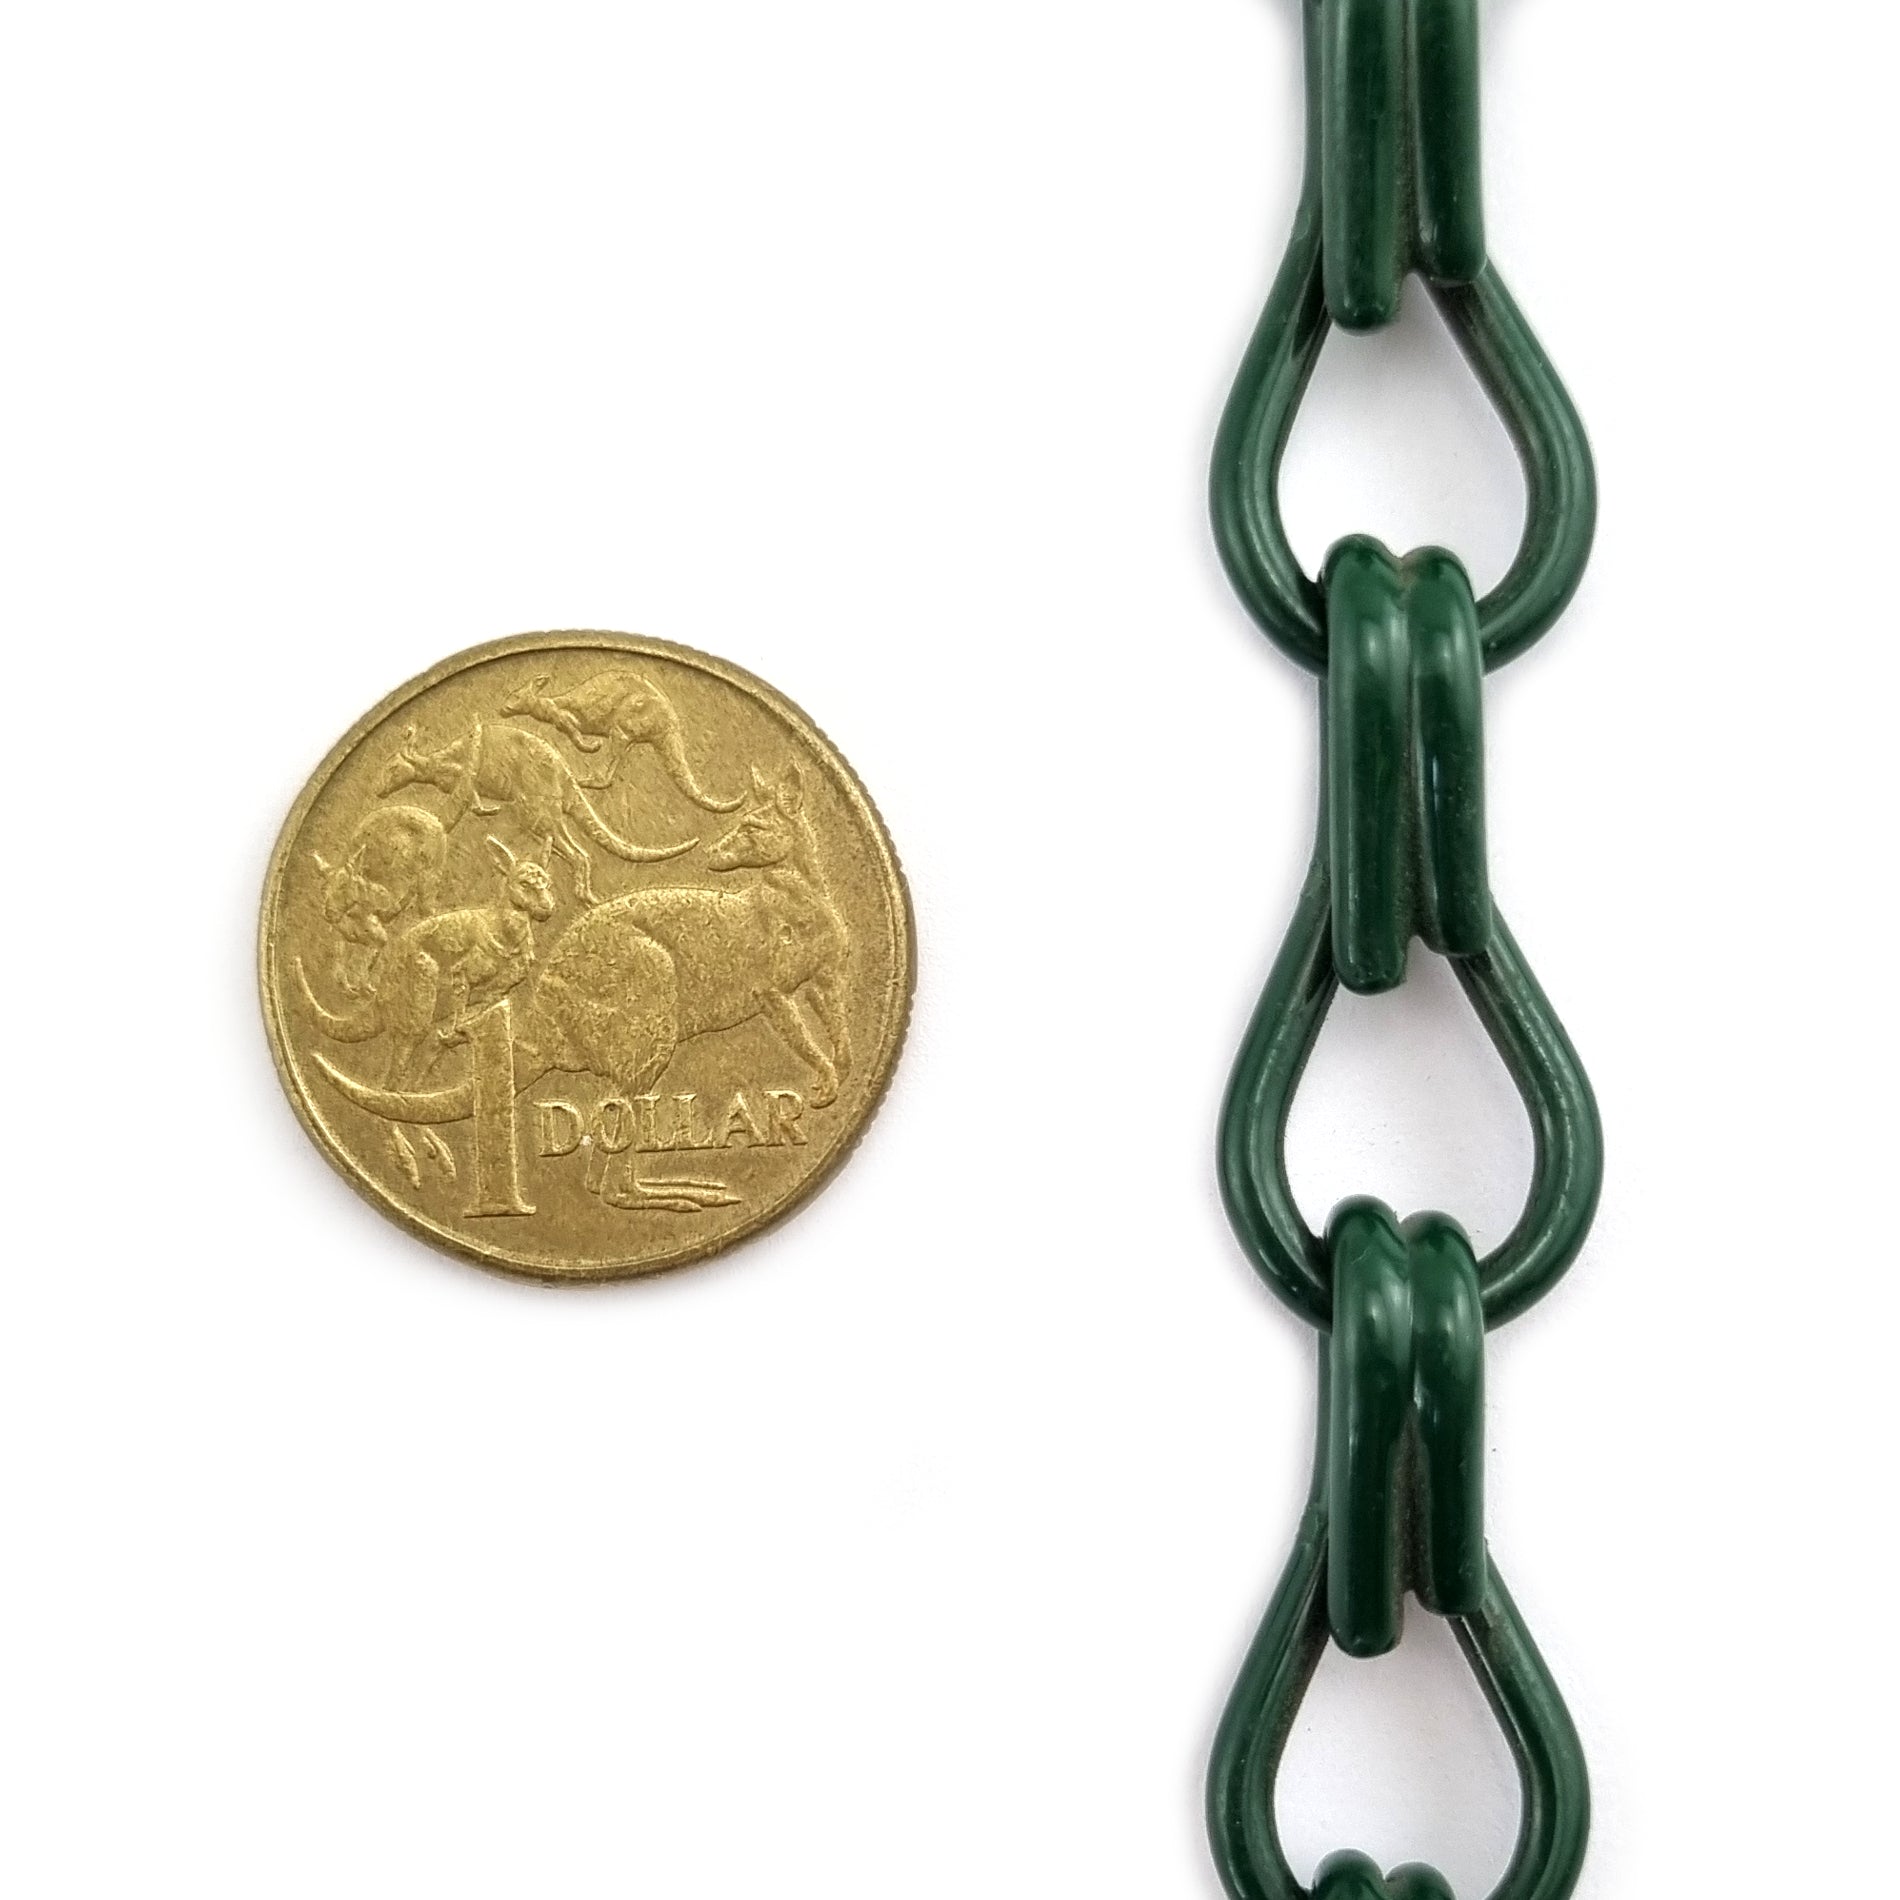 2.5mm Double Jack Chain Green Powder Coated. Australian made. Qty 30m or by the metre. Shop hardware online chain.com.au